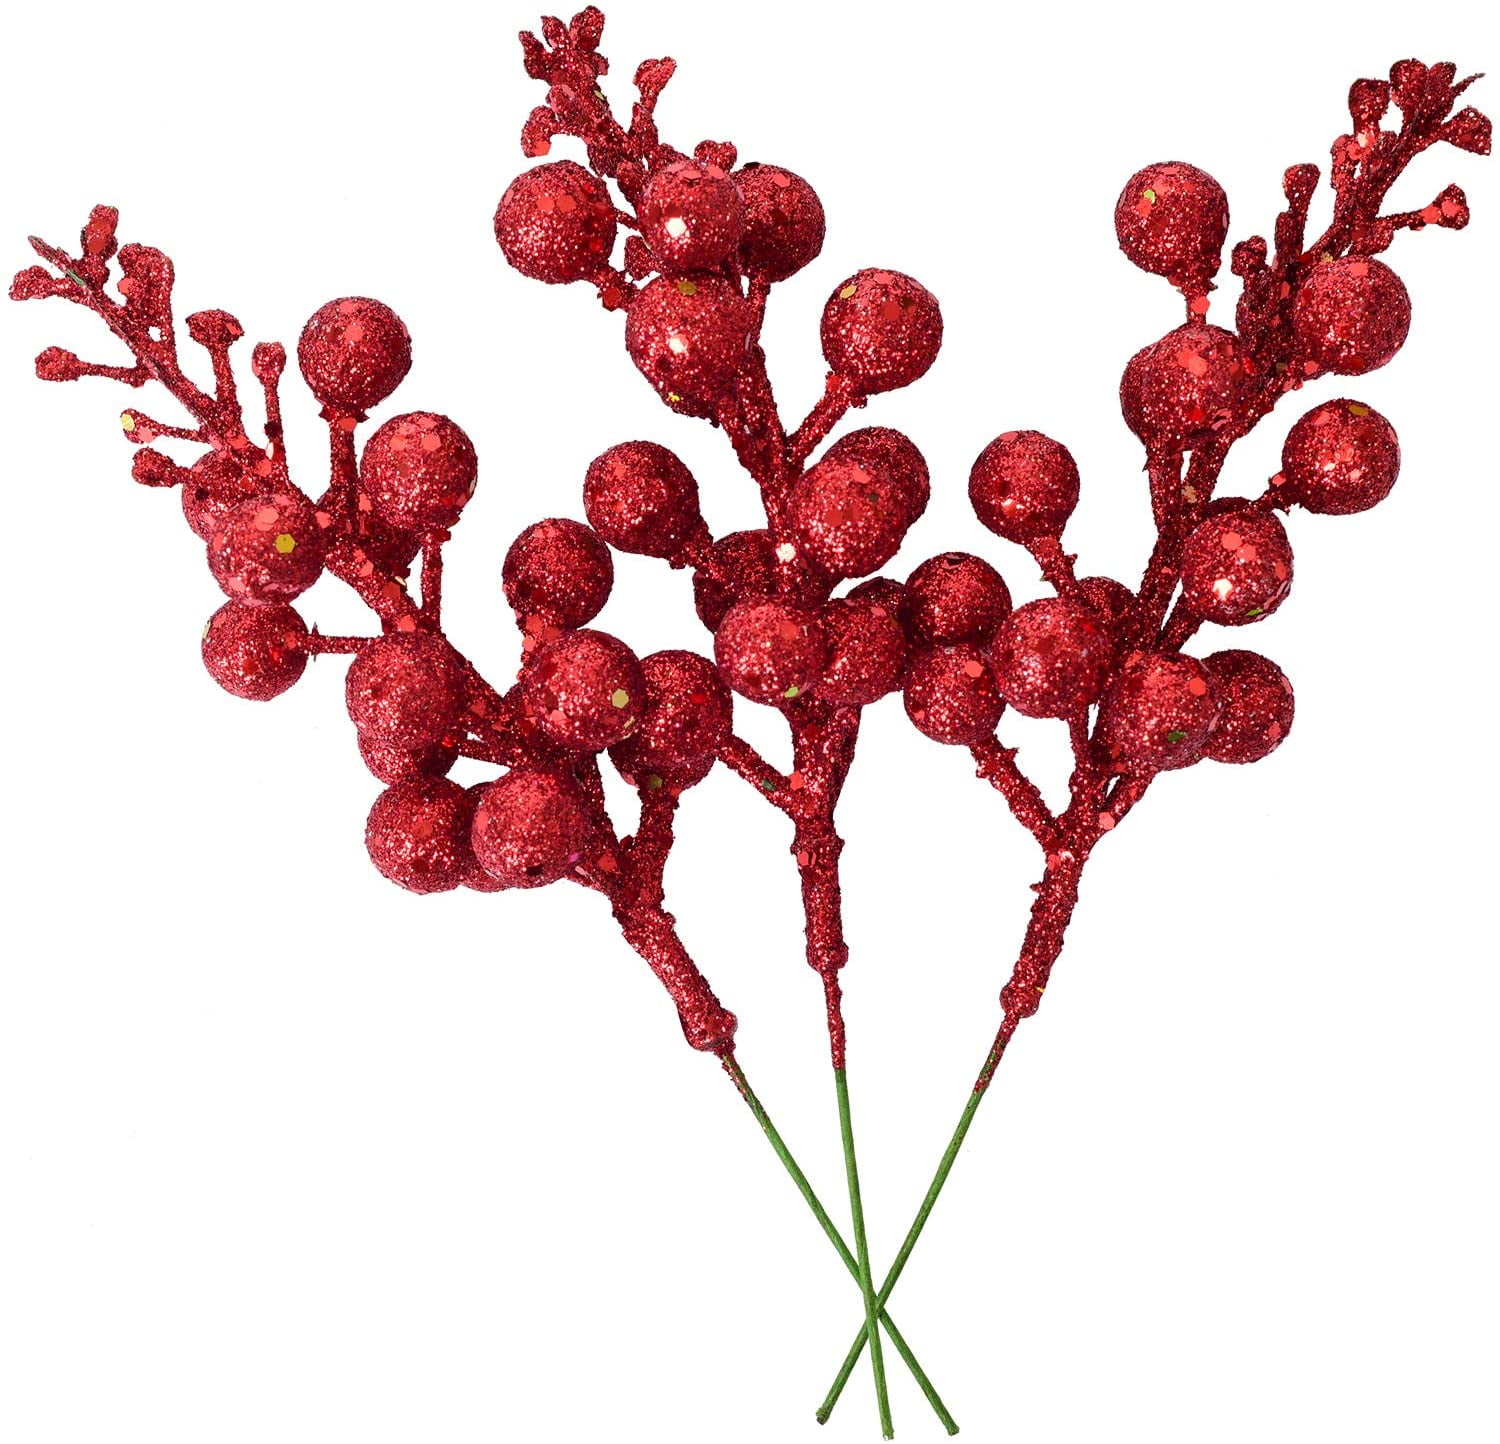 Xmarks 18 Artificial Red Berry Stems, 1 Piece Christmas Red Berries Holly  Berry Branches for Christmas Tree Holiday Decor DIY Craft 